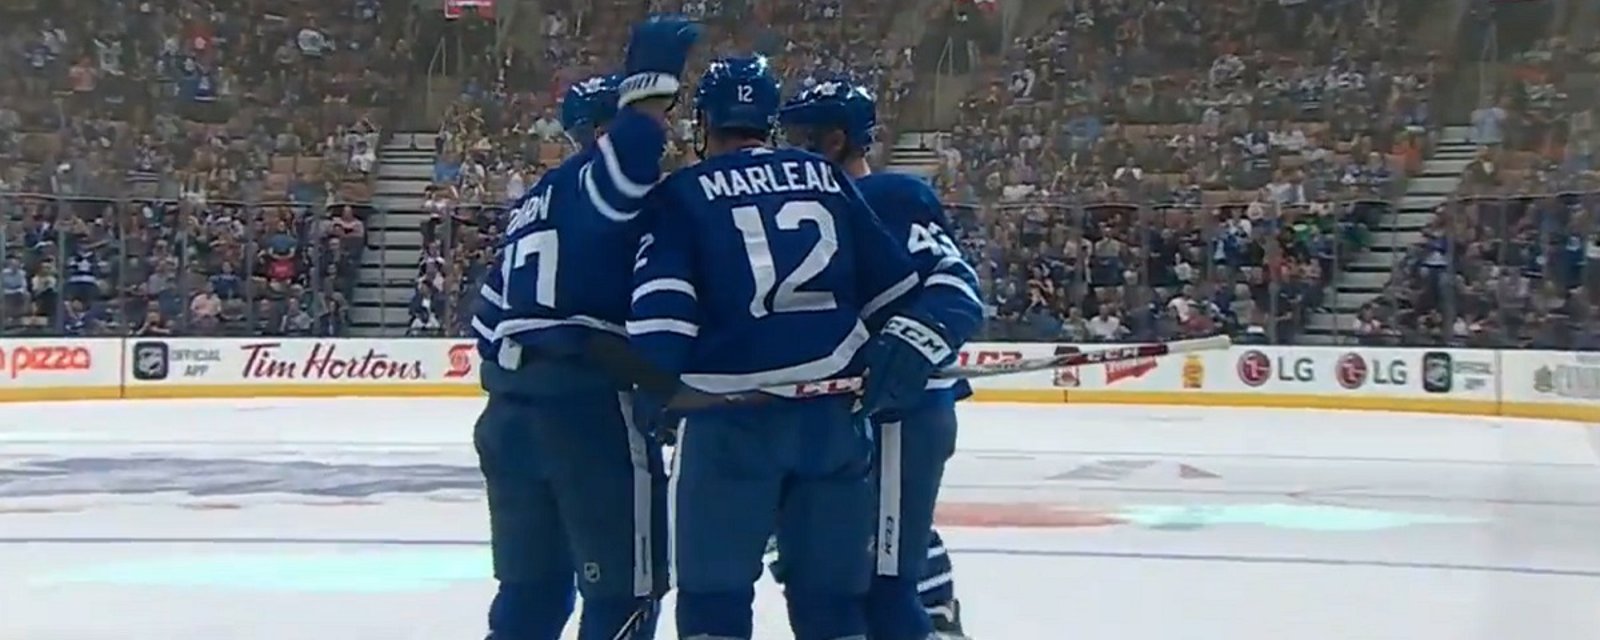 Patrick Marleau scores his first goal as a Maple Leaf.